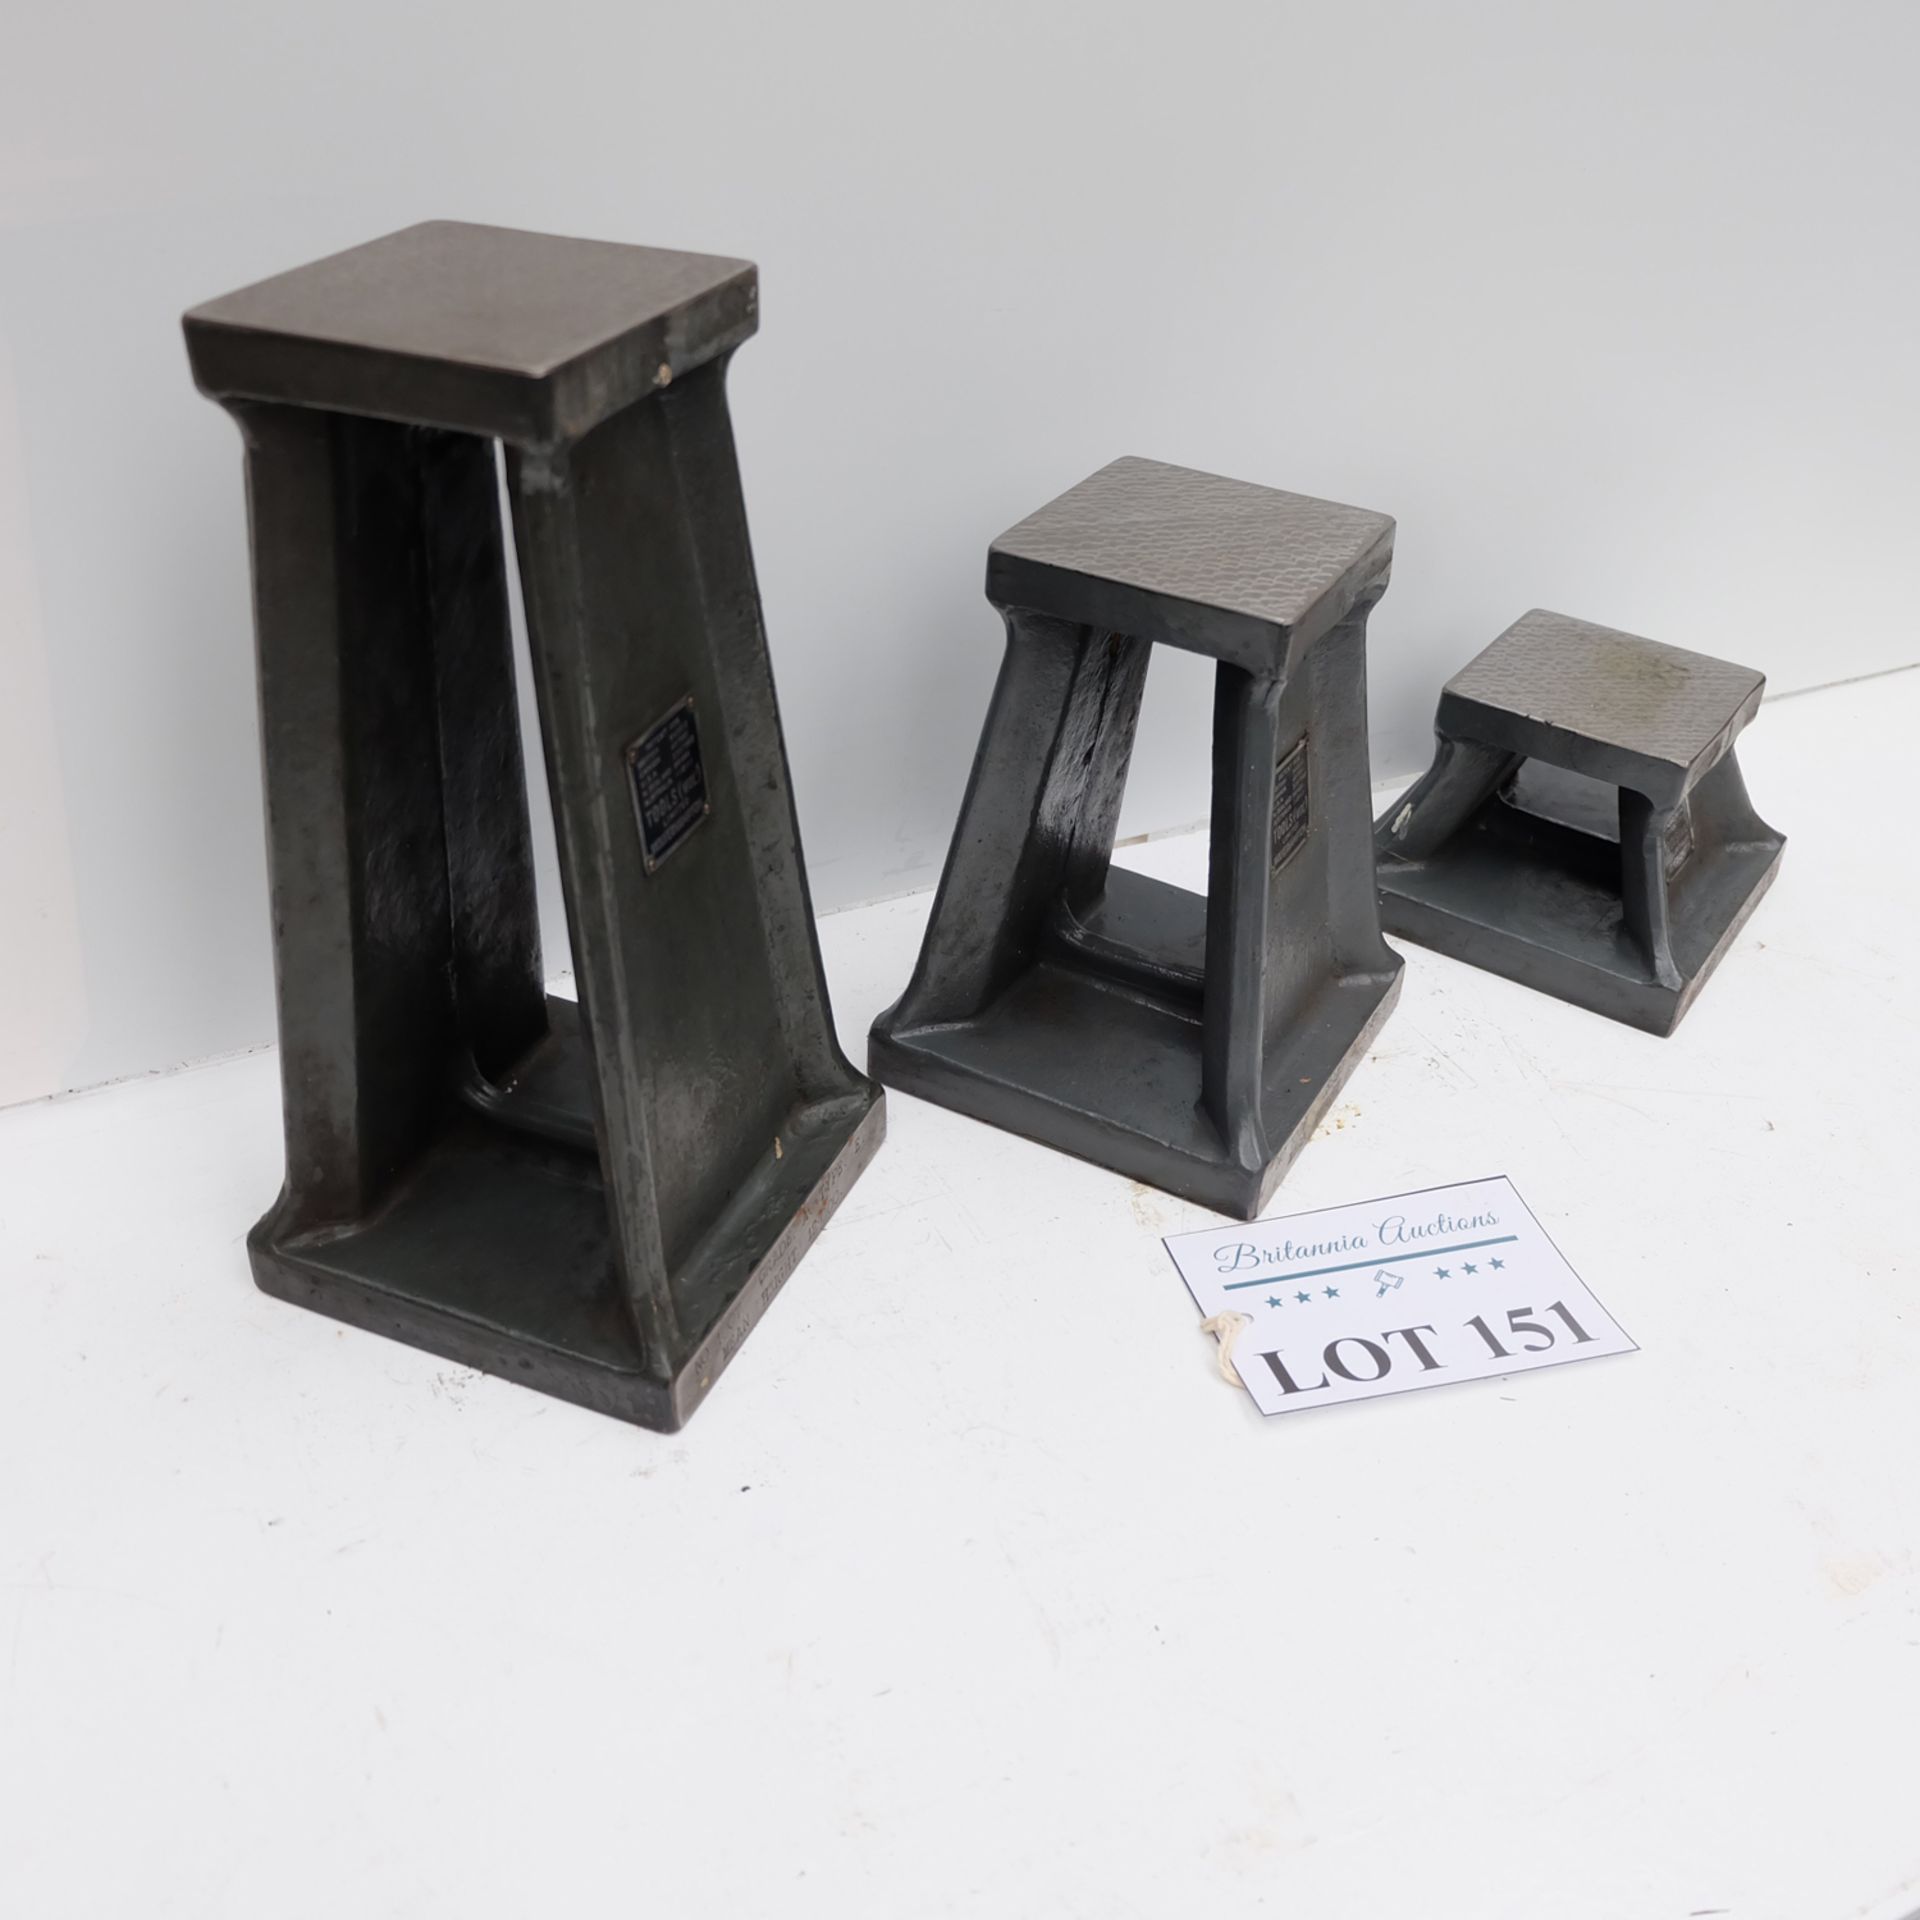 3 x Tools (Wol) Ltd. Height Gauge Extension Towers. - Image 7 of 11